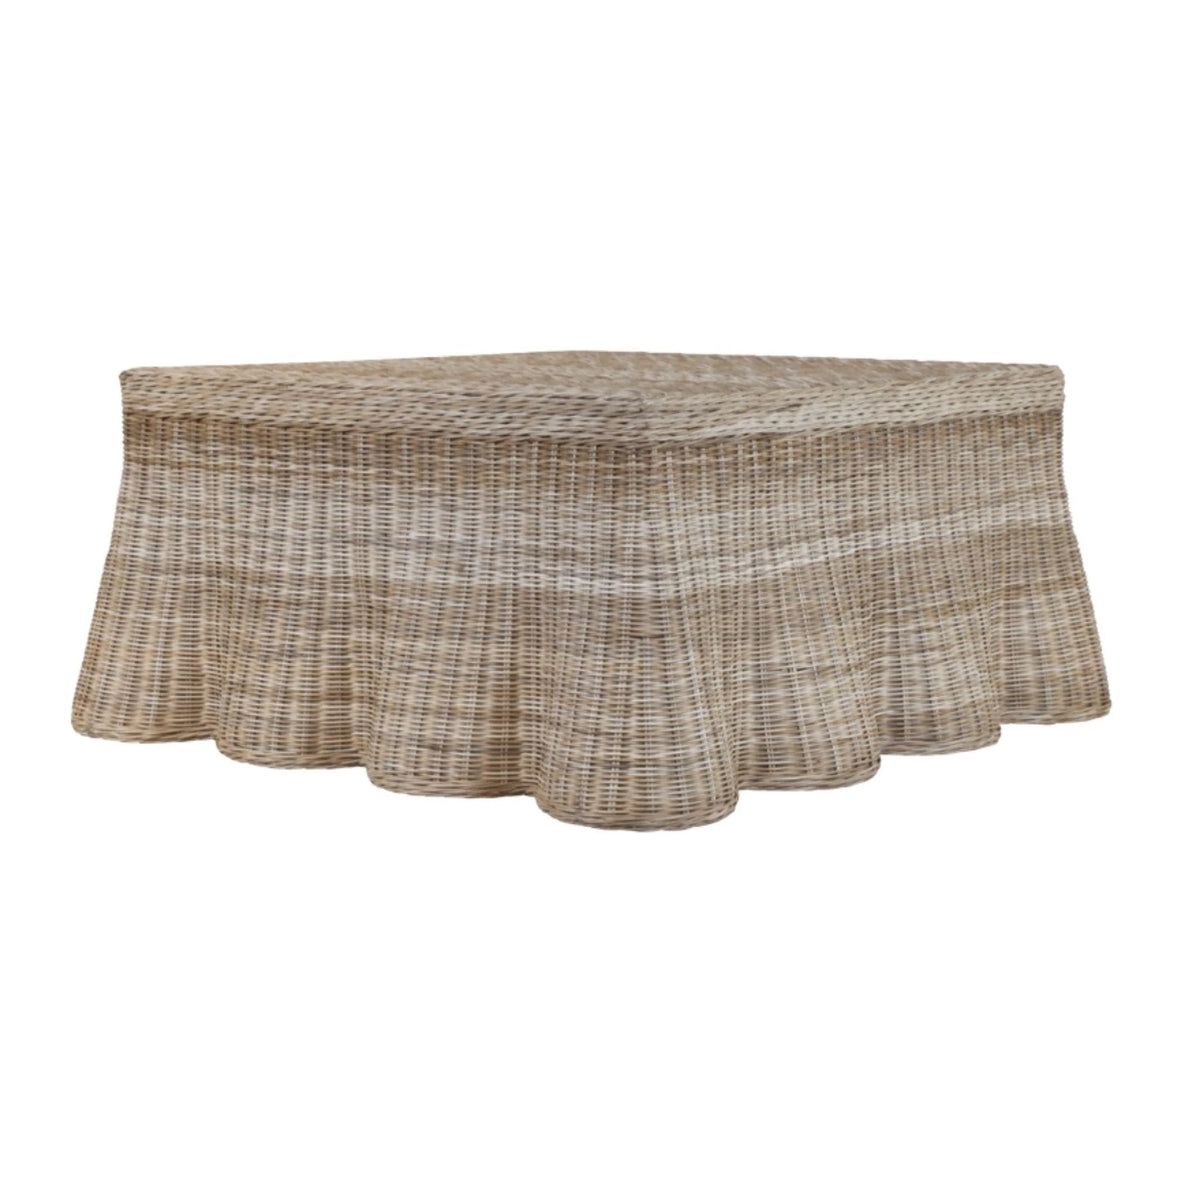 Harvested Rattan Scalloped Square Coffee Table | The Well Appointed House, LLC